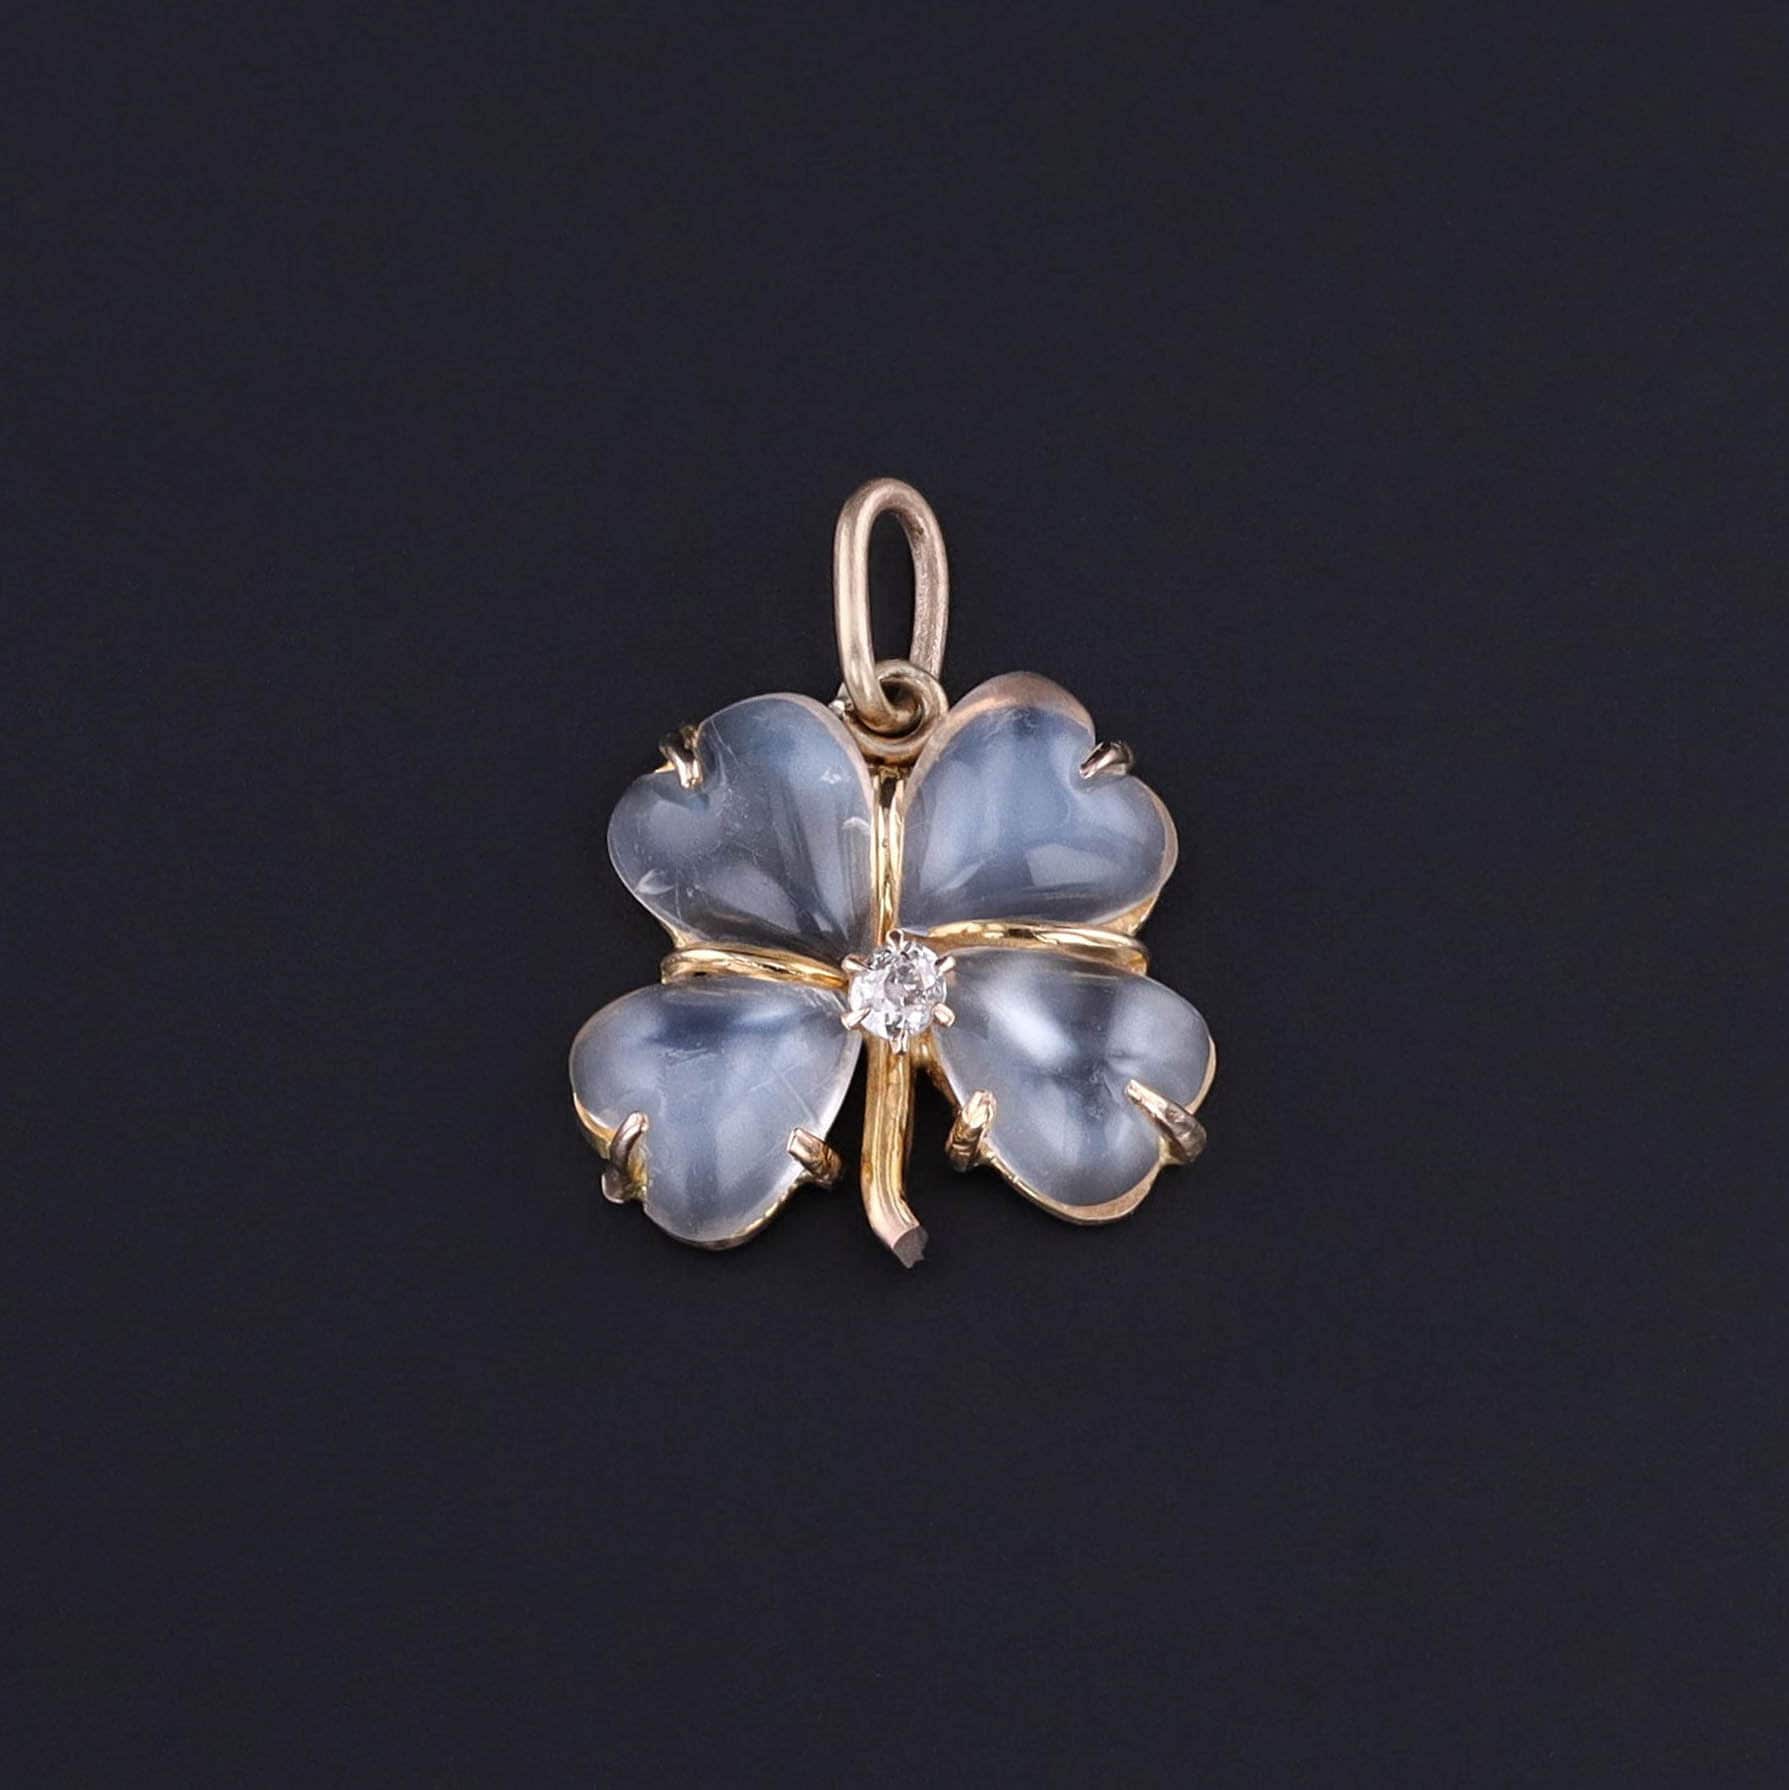 Antique Moonstone and Diamond Clover Charm of 14k Gold